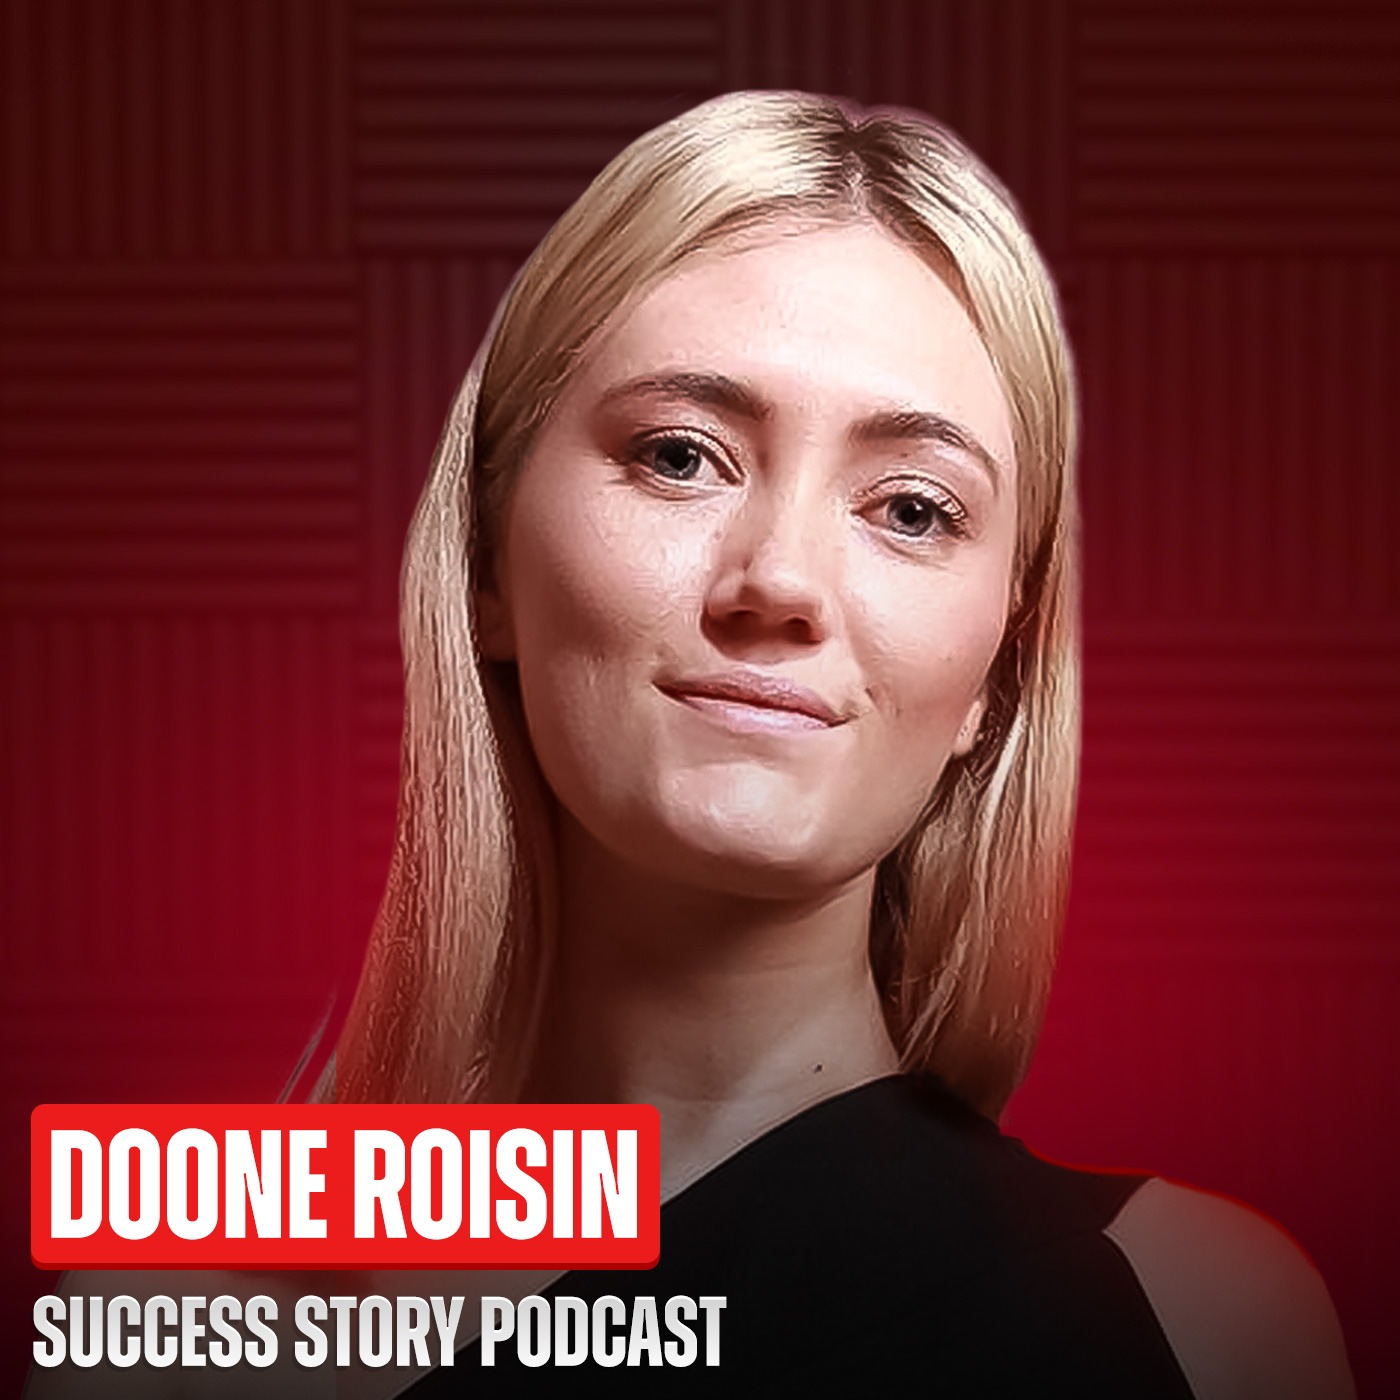 Lessons - Overcoming Imposter Syndrome | Doone Roisin - Founder & Host of the Female Startup Club Podcast